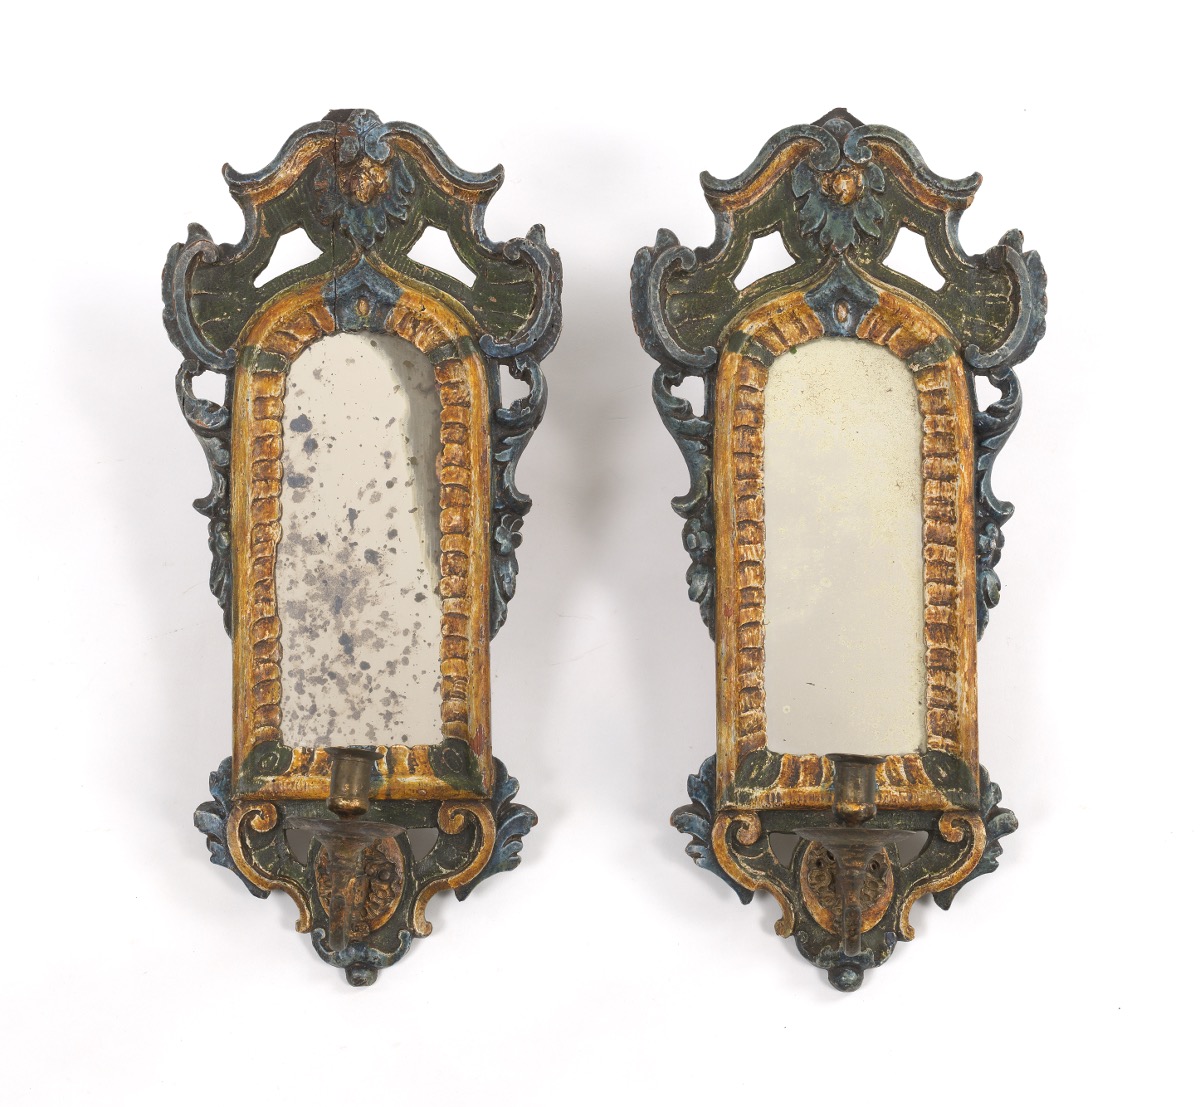 A Pair of 18th Century Reflectors from Lisbon